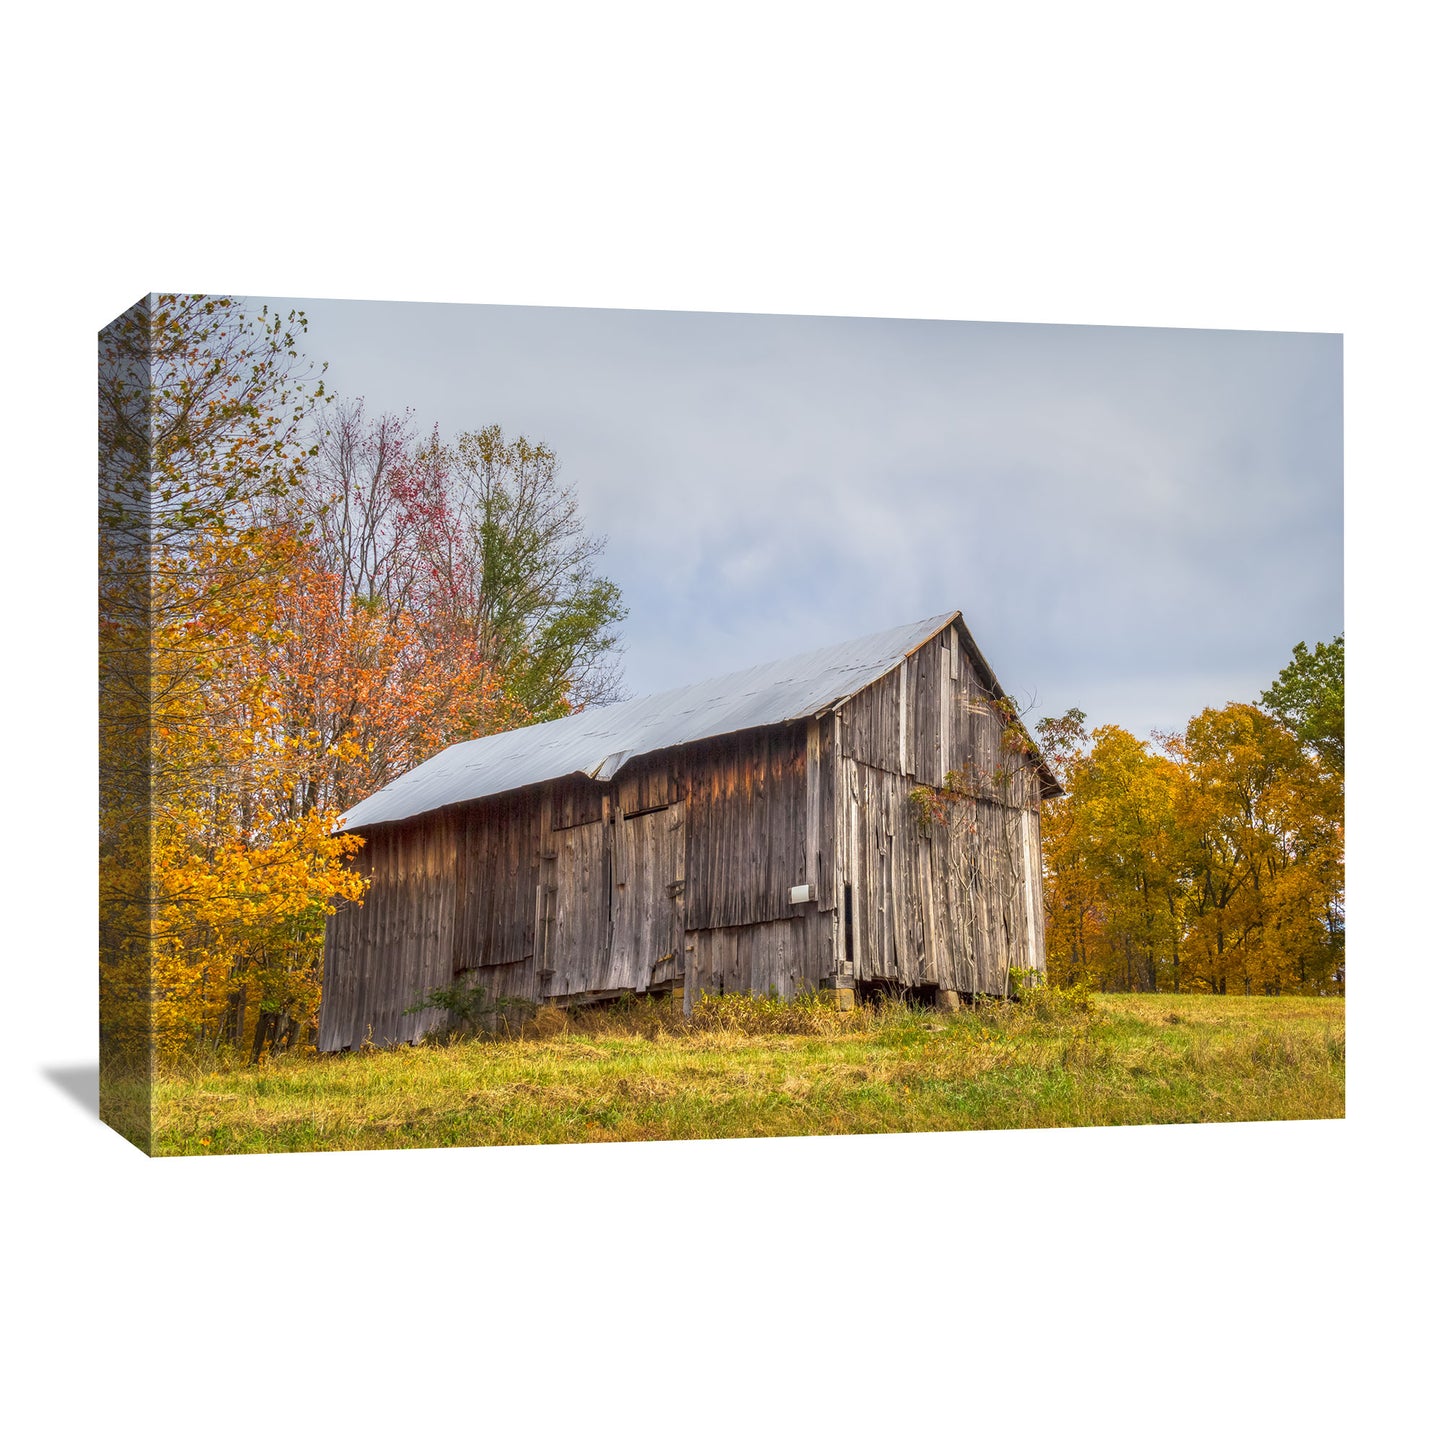 canvas art of an ohio barn in the fall